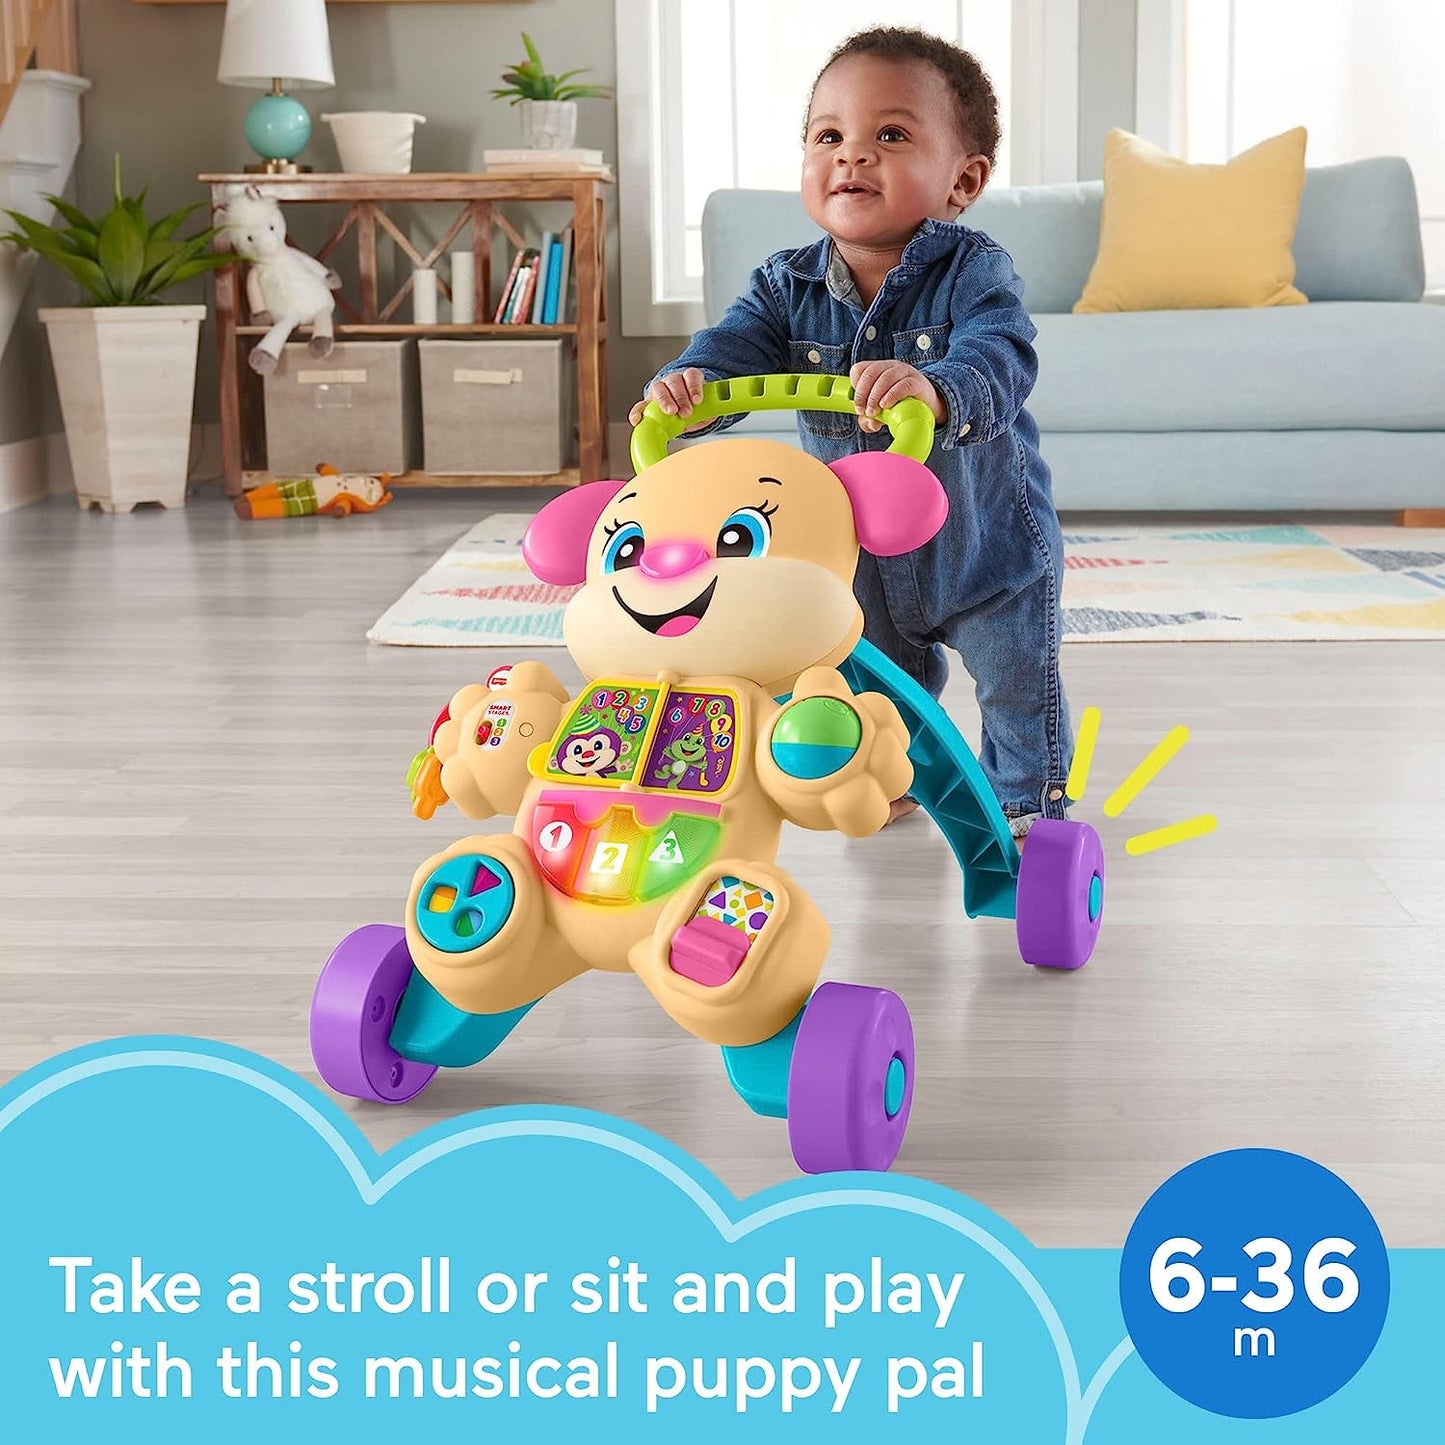 Fisher-Price - Musical Lion Walker (Styles Vary)